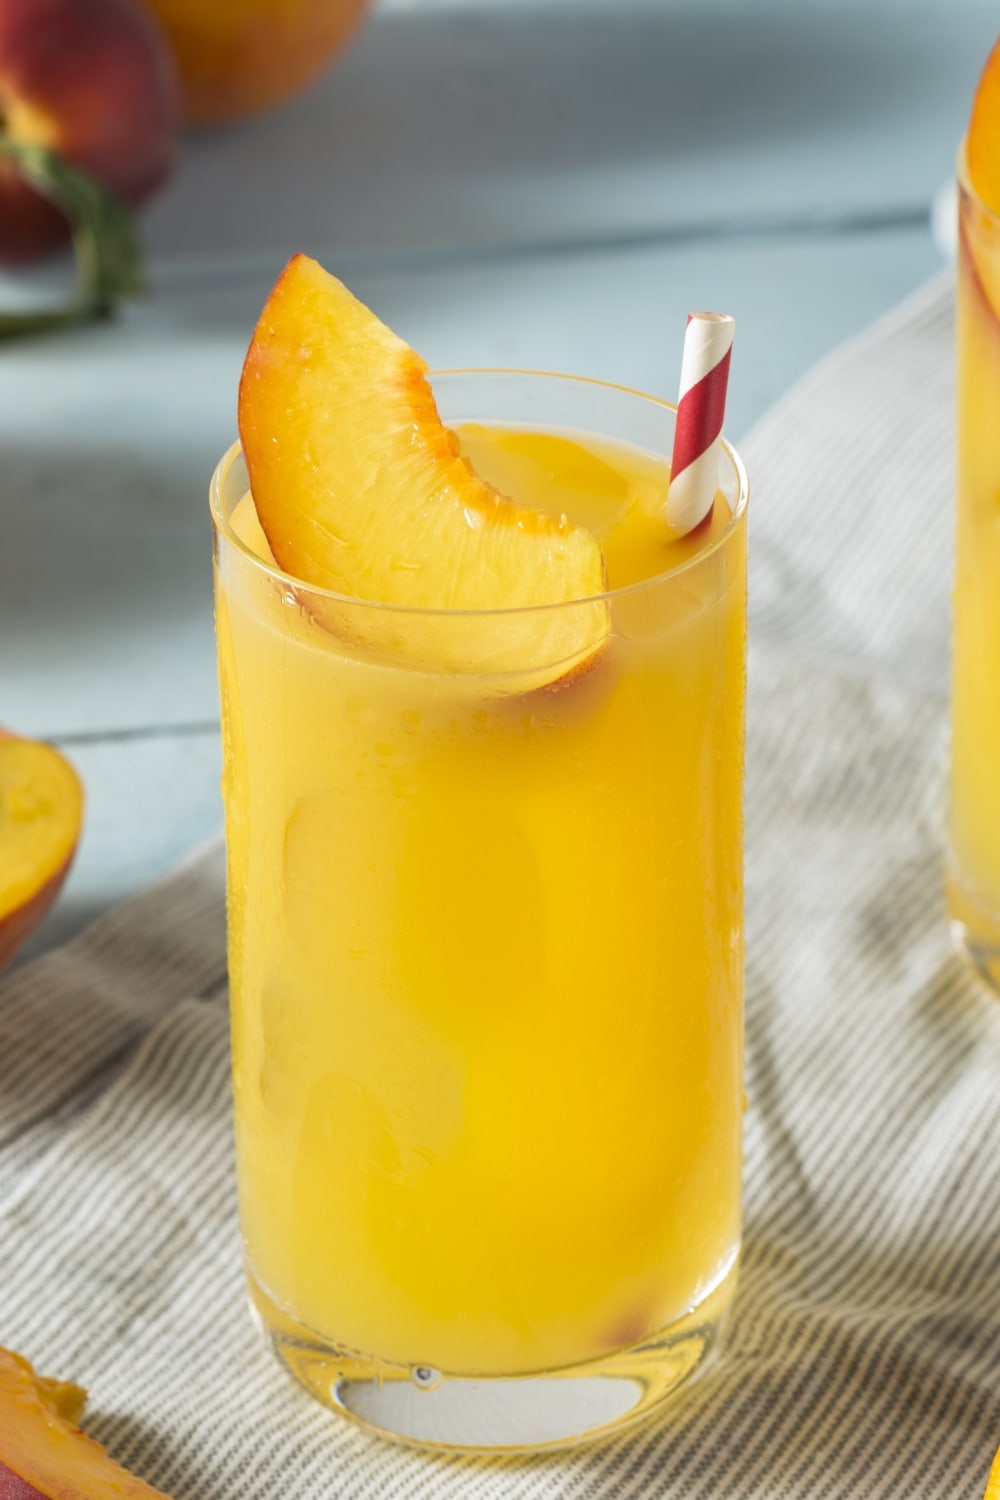 Fuzzy Navel Garnished With Slice of Peach